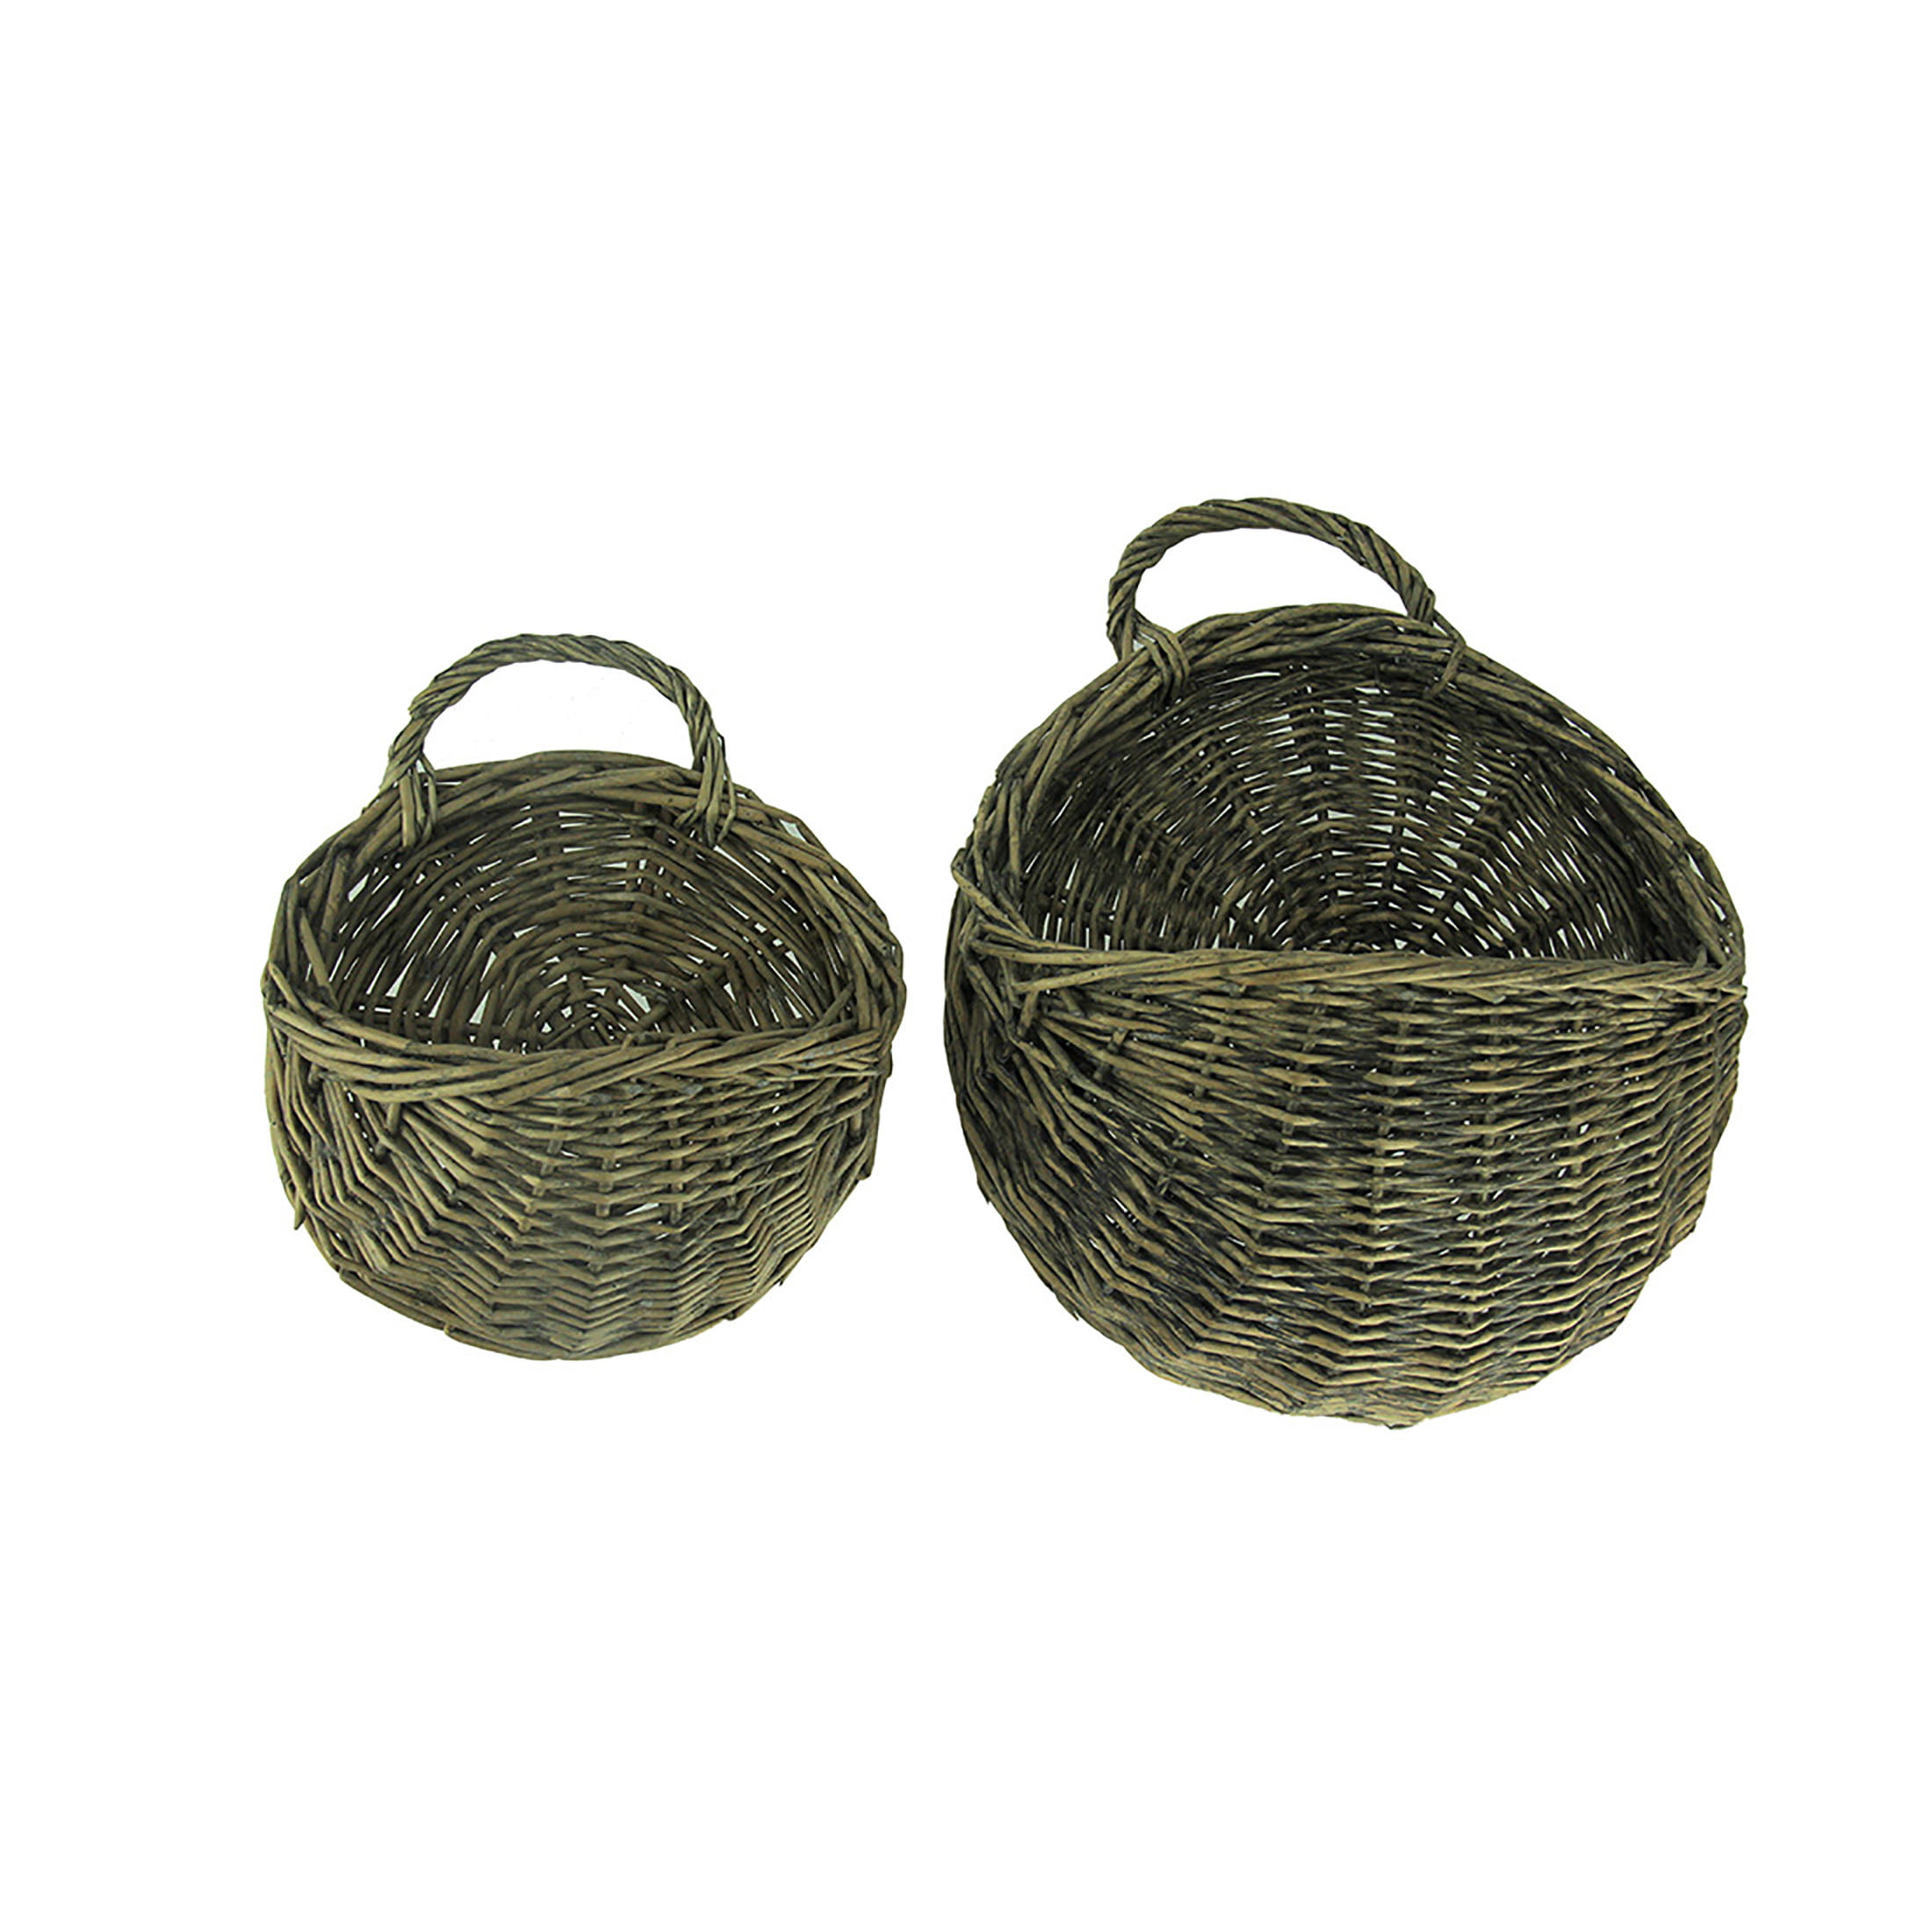 Rustic Round Woven Wicker Wall Basket Set Of 2 Com - Round Wicker Baskets To Hang On Wall